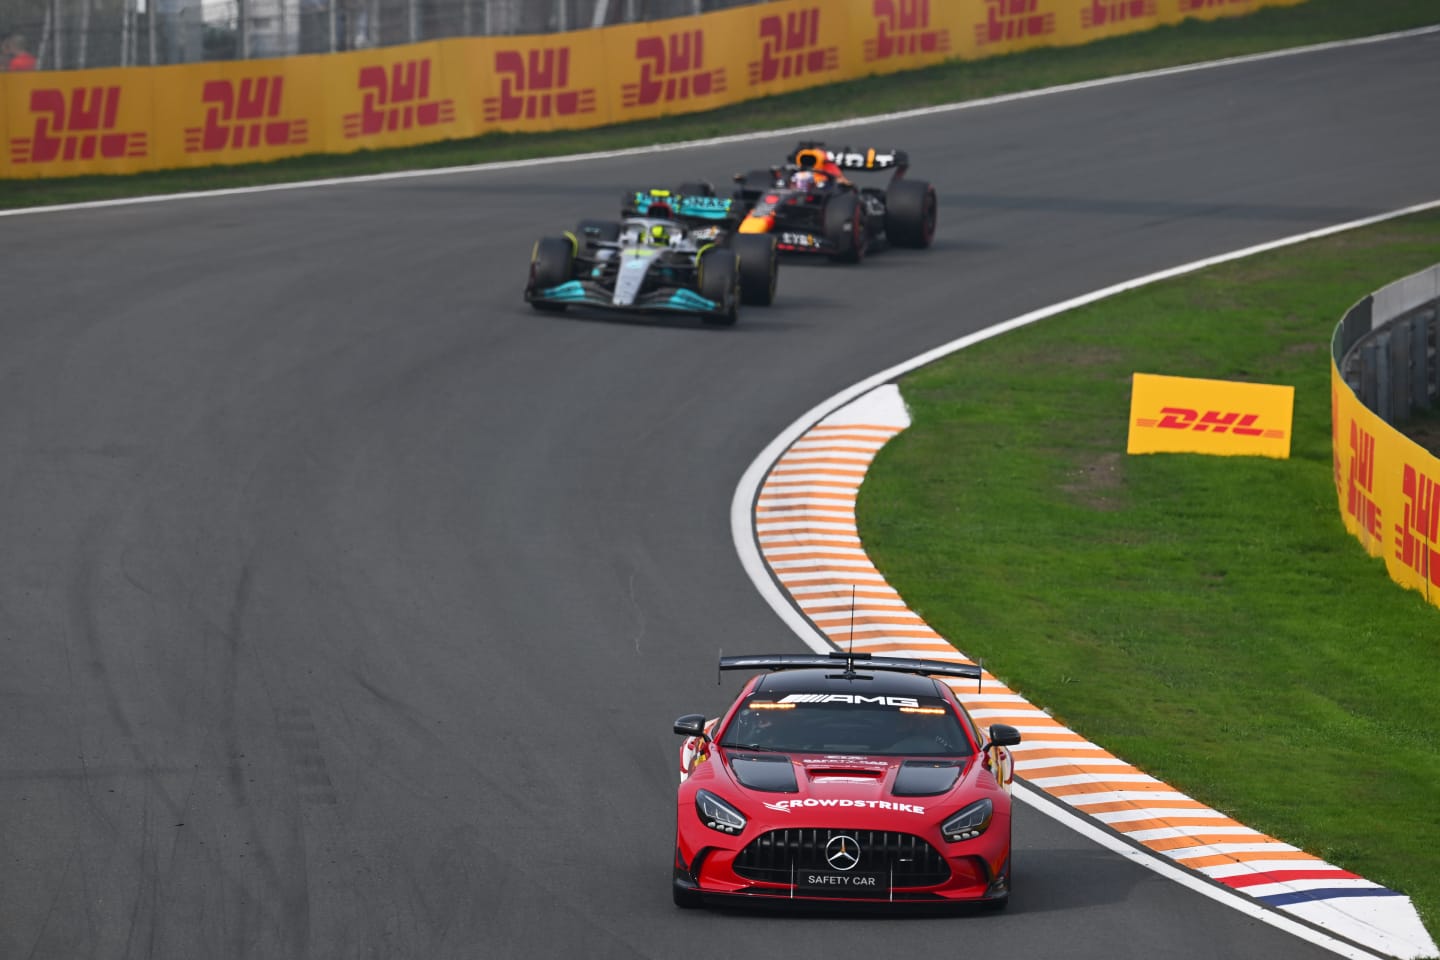 ZANDVOORT, NETHERLANDS - SEPTEMBER 04: The FIA safety car leads Lewis Hamilton of Great Britain driving the (44) Mercedes AMG Petronas F1 Team W13 and Max Verstappen of the Netherlands driving the (1) Oracle Red Bull Racing RB18 during the F1 Grand Prix of The Netherlands at Circuit Zandvoort on September 04, 2022 in Zandvoort, Netherlands. (Photo by Clive Mason/Getty Images)